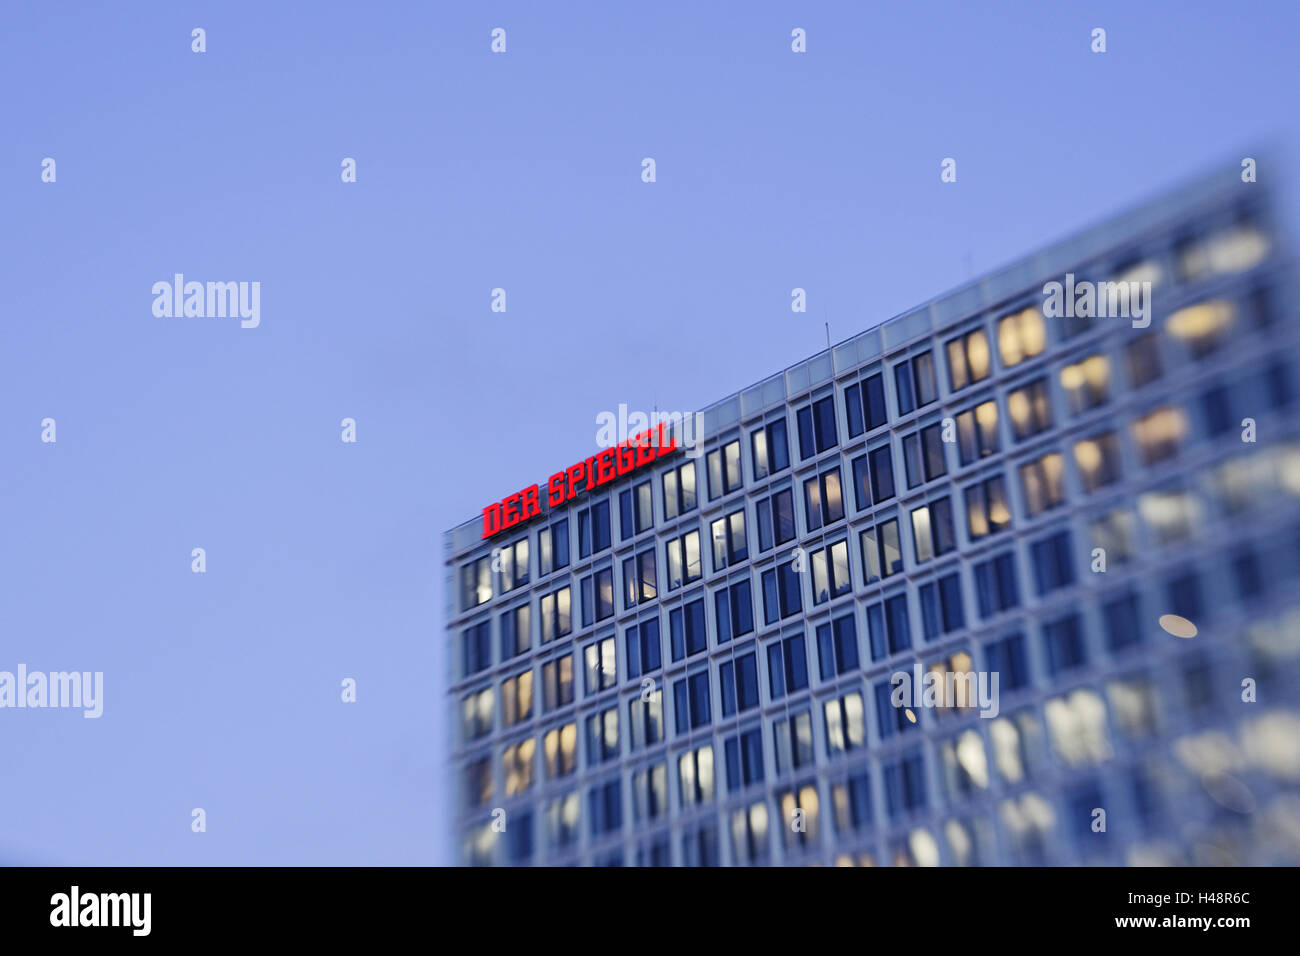 Facade of the reflector of publishing house, selective focus, Hanseatic town Hamburg, Germany, Stock Photo